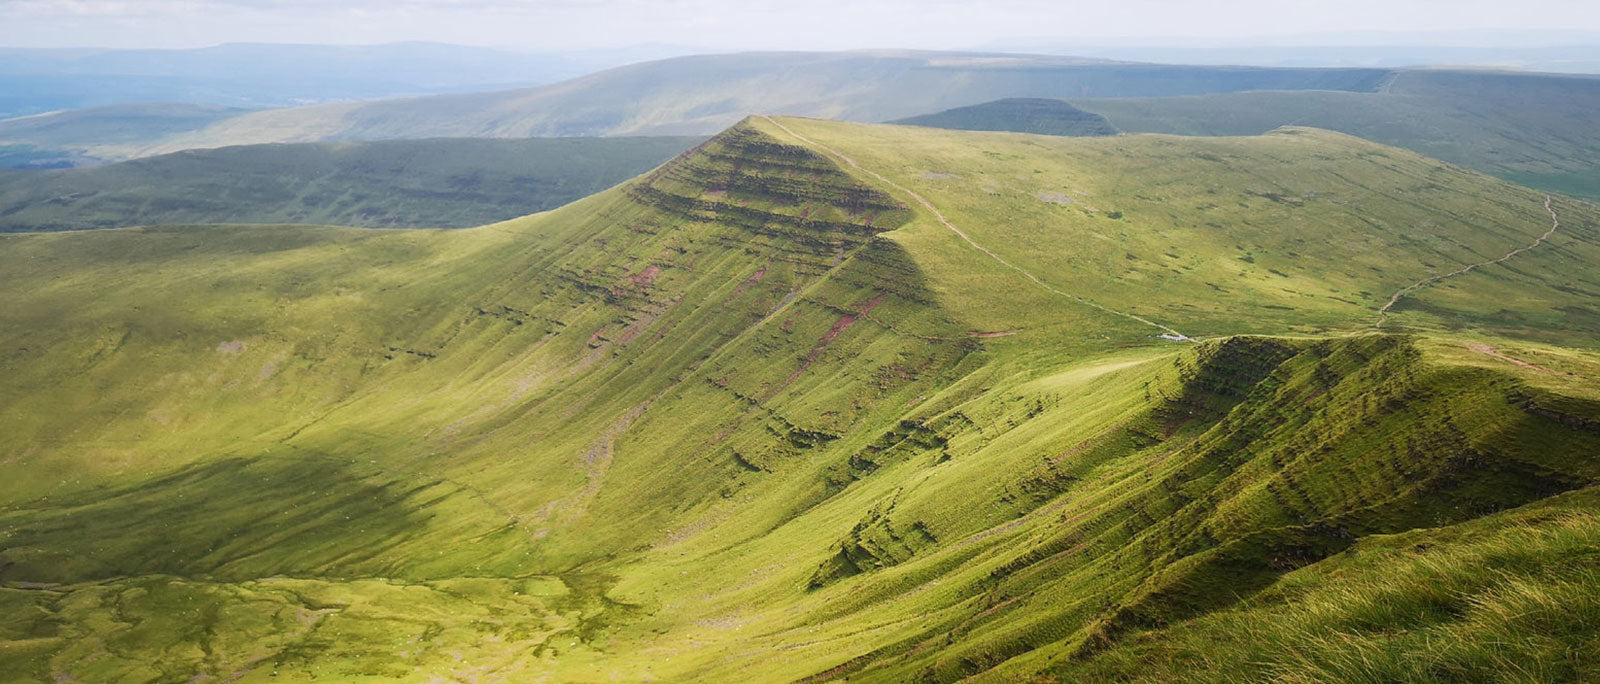 Brecon Beacons Field Guide - WildBounds UK